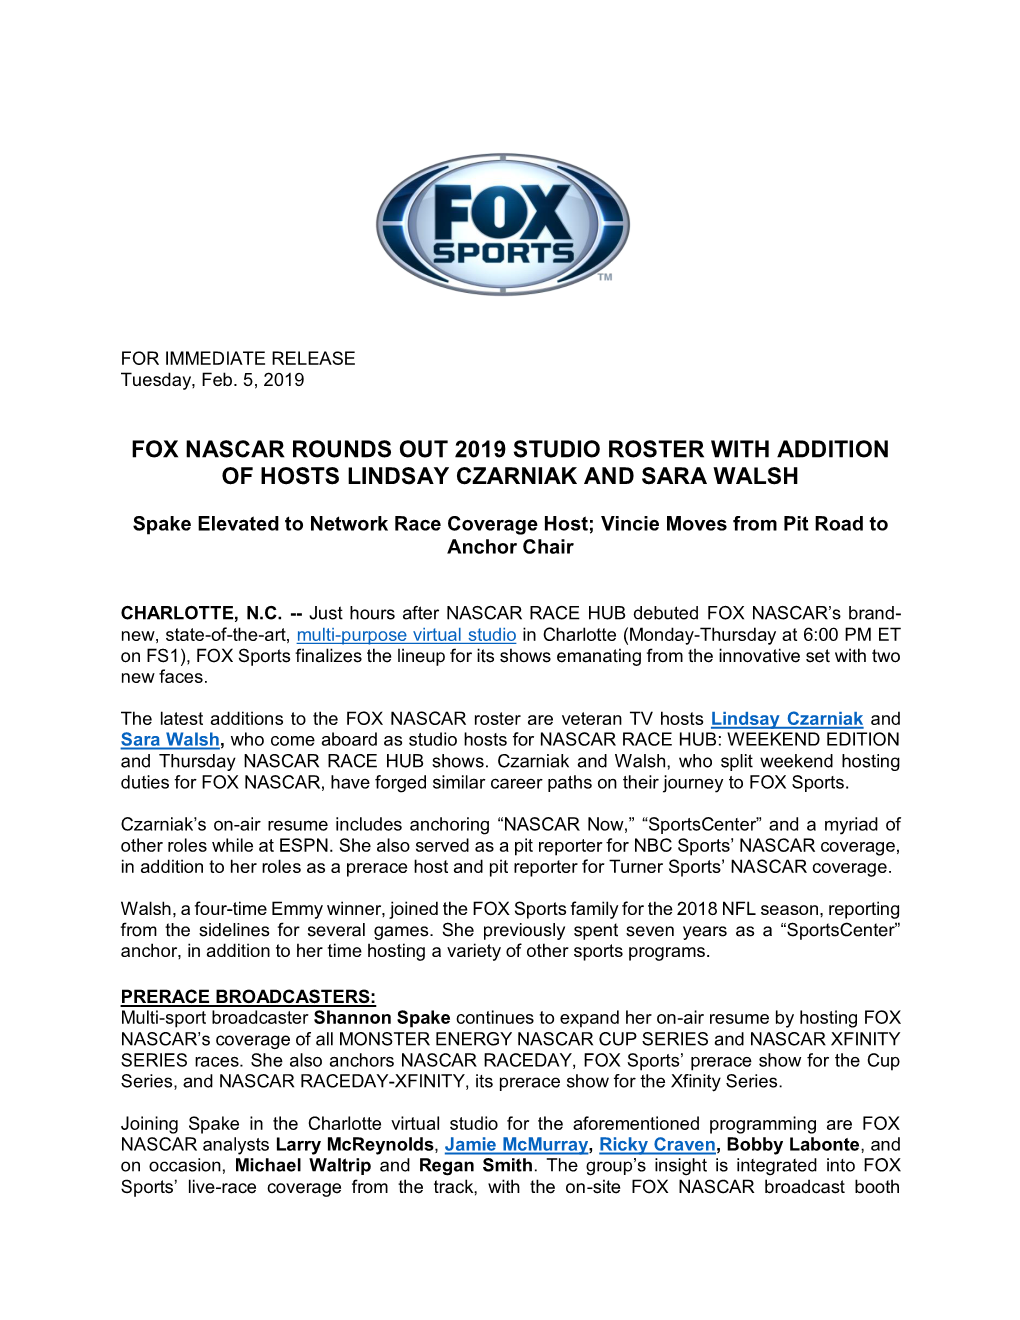 Fox Nascar Rounds out 2019 Studio Roster with Addition of Hosts Lindsay Czarniak and Sara Walsh